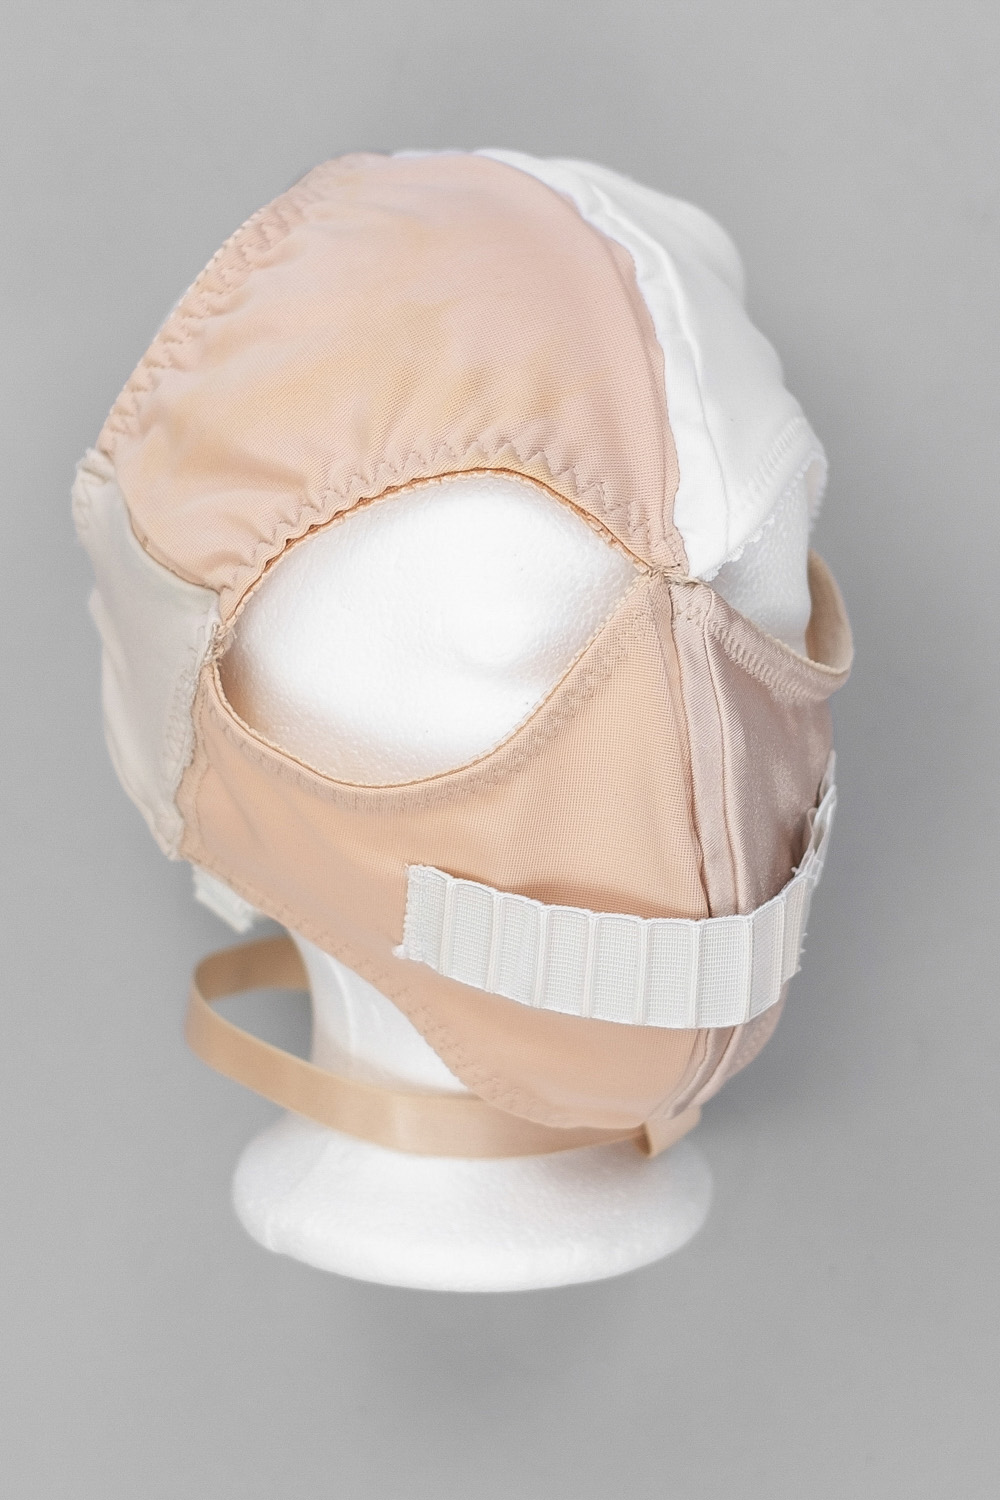 Gusset Mask in Beige and White 50